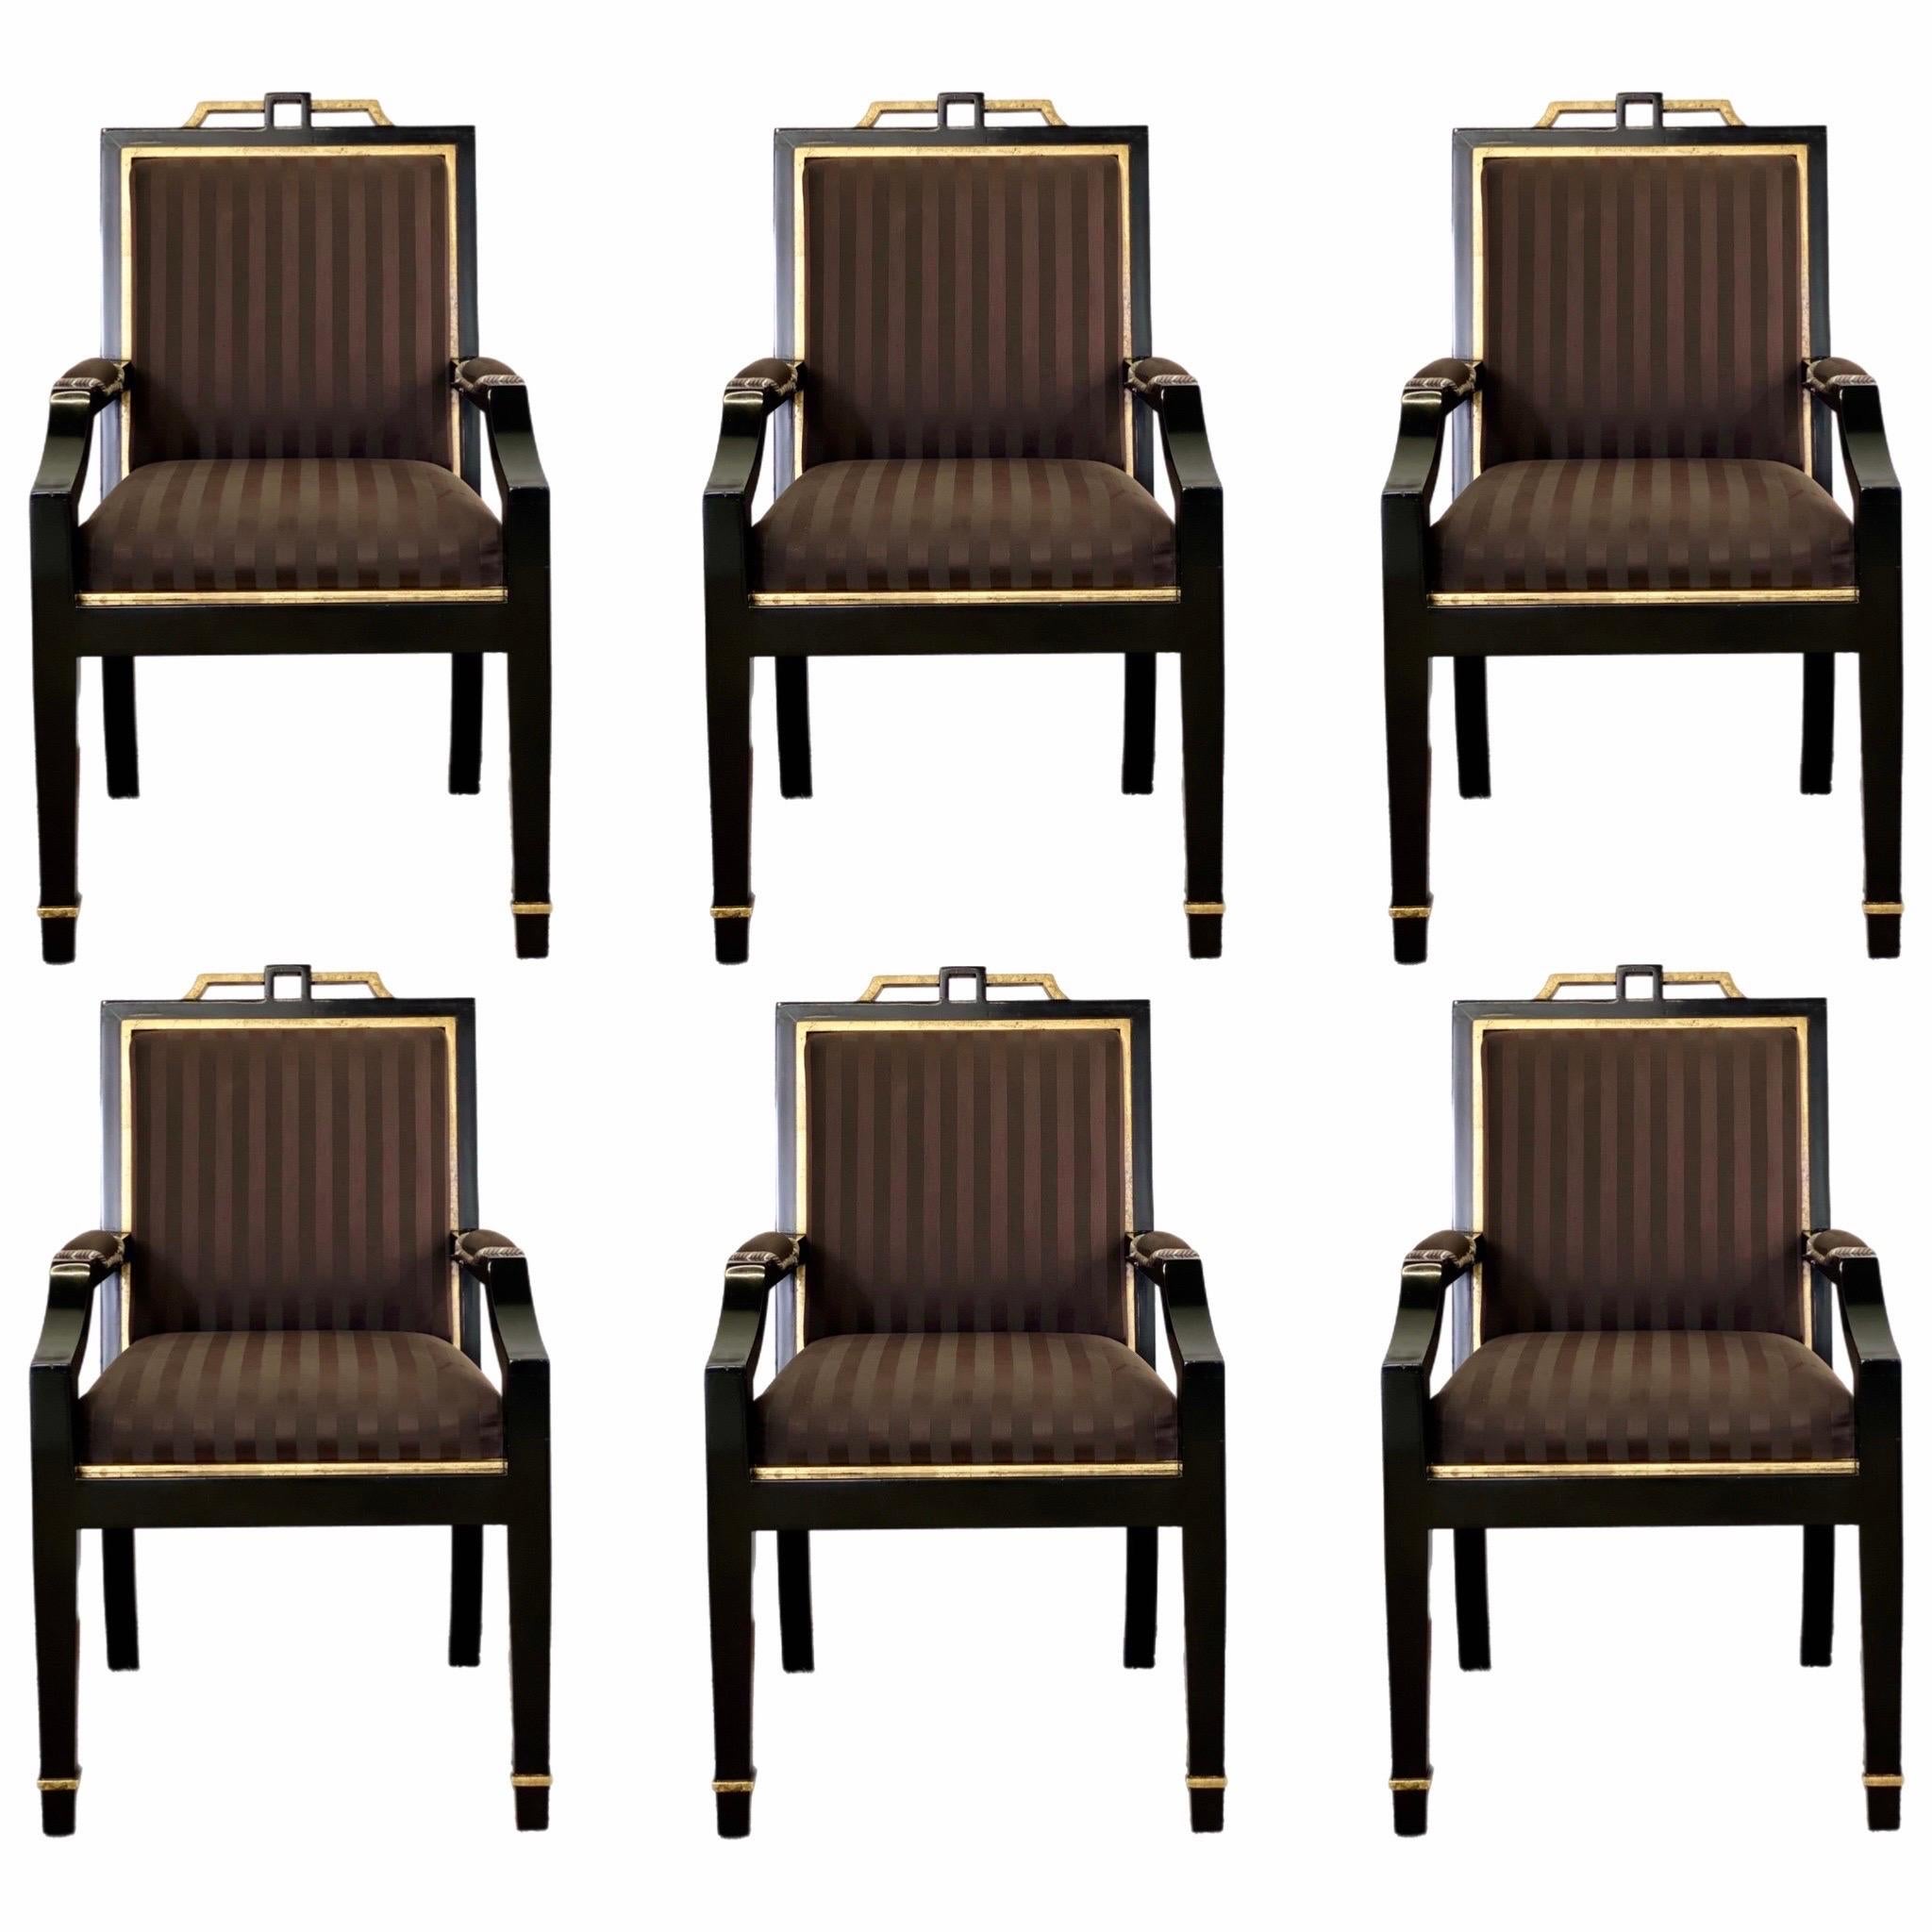 1980s Hollywood Regency Black Lacquer and Satin Dining Armchairs – Set of 6